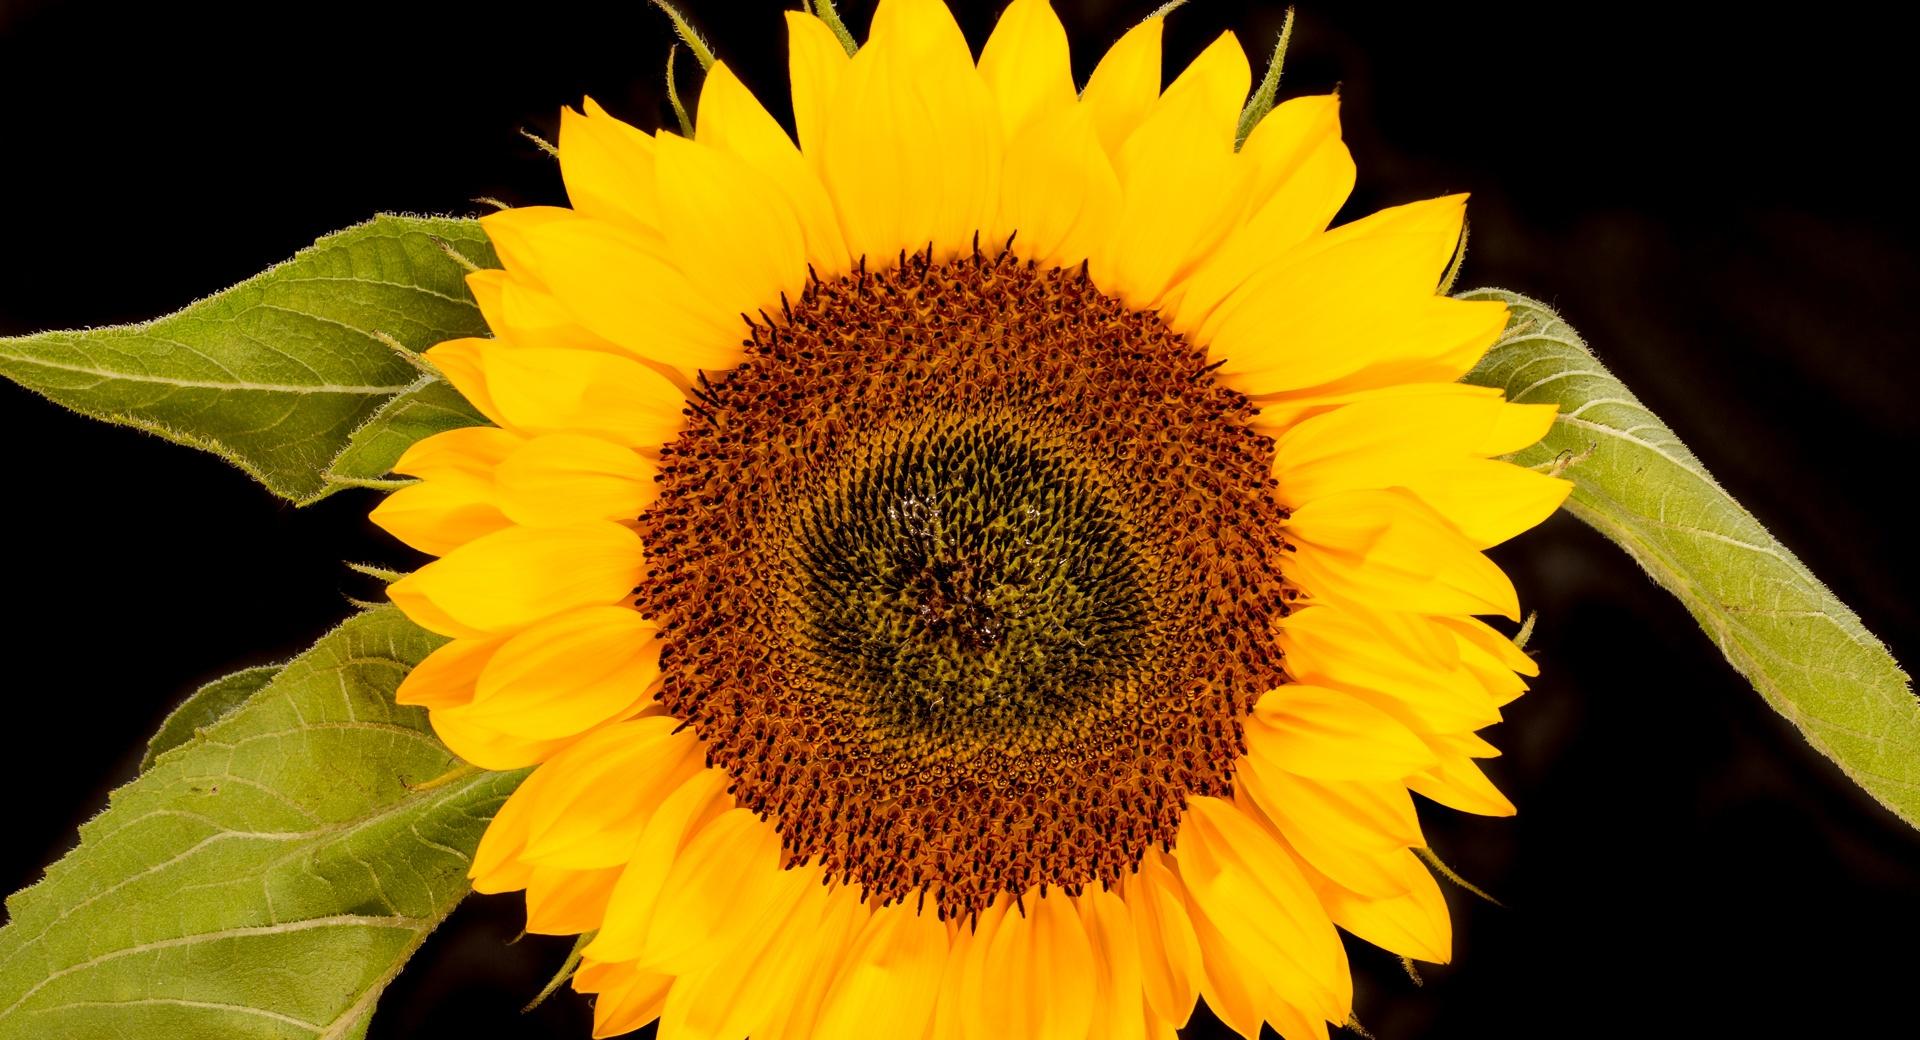 Sunflower Head, Black Background wallpapers HD quality